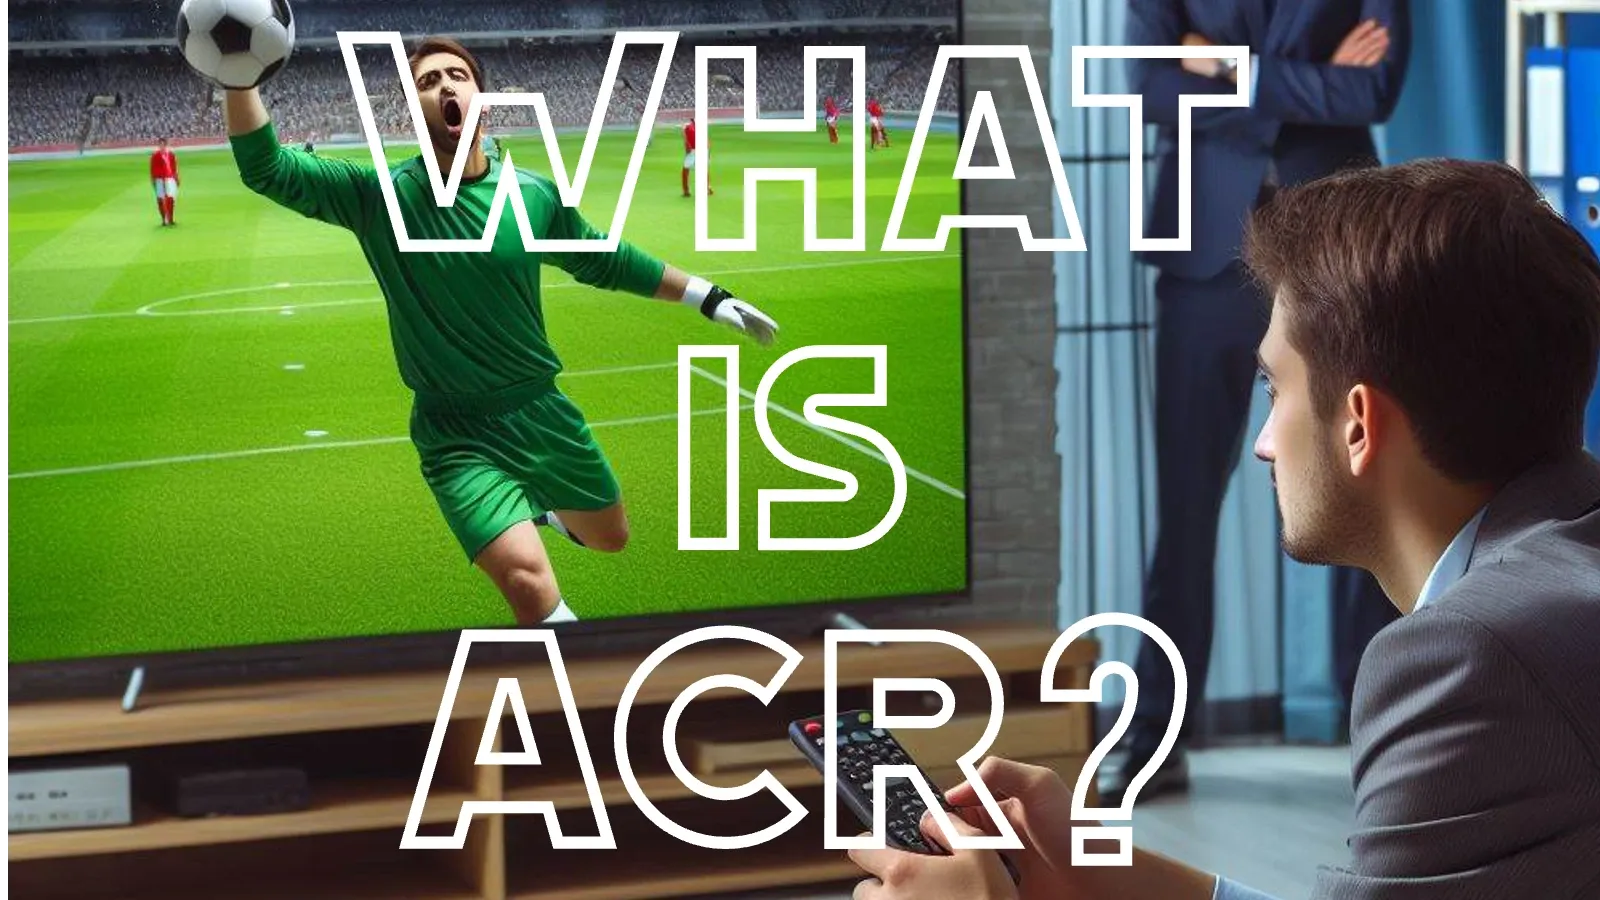 ACR stands for Automatic Content Recognition